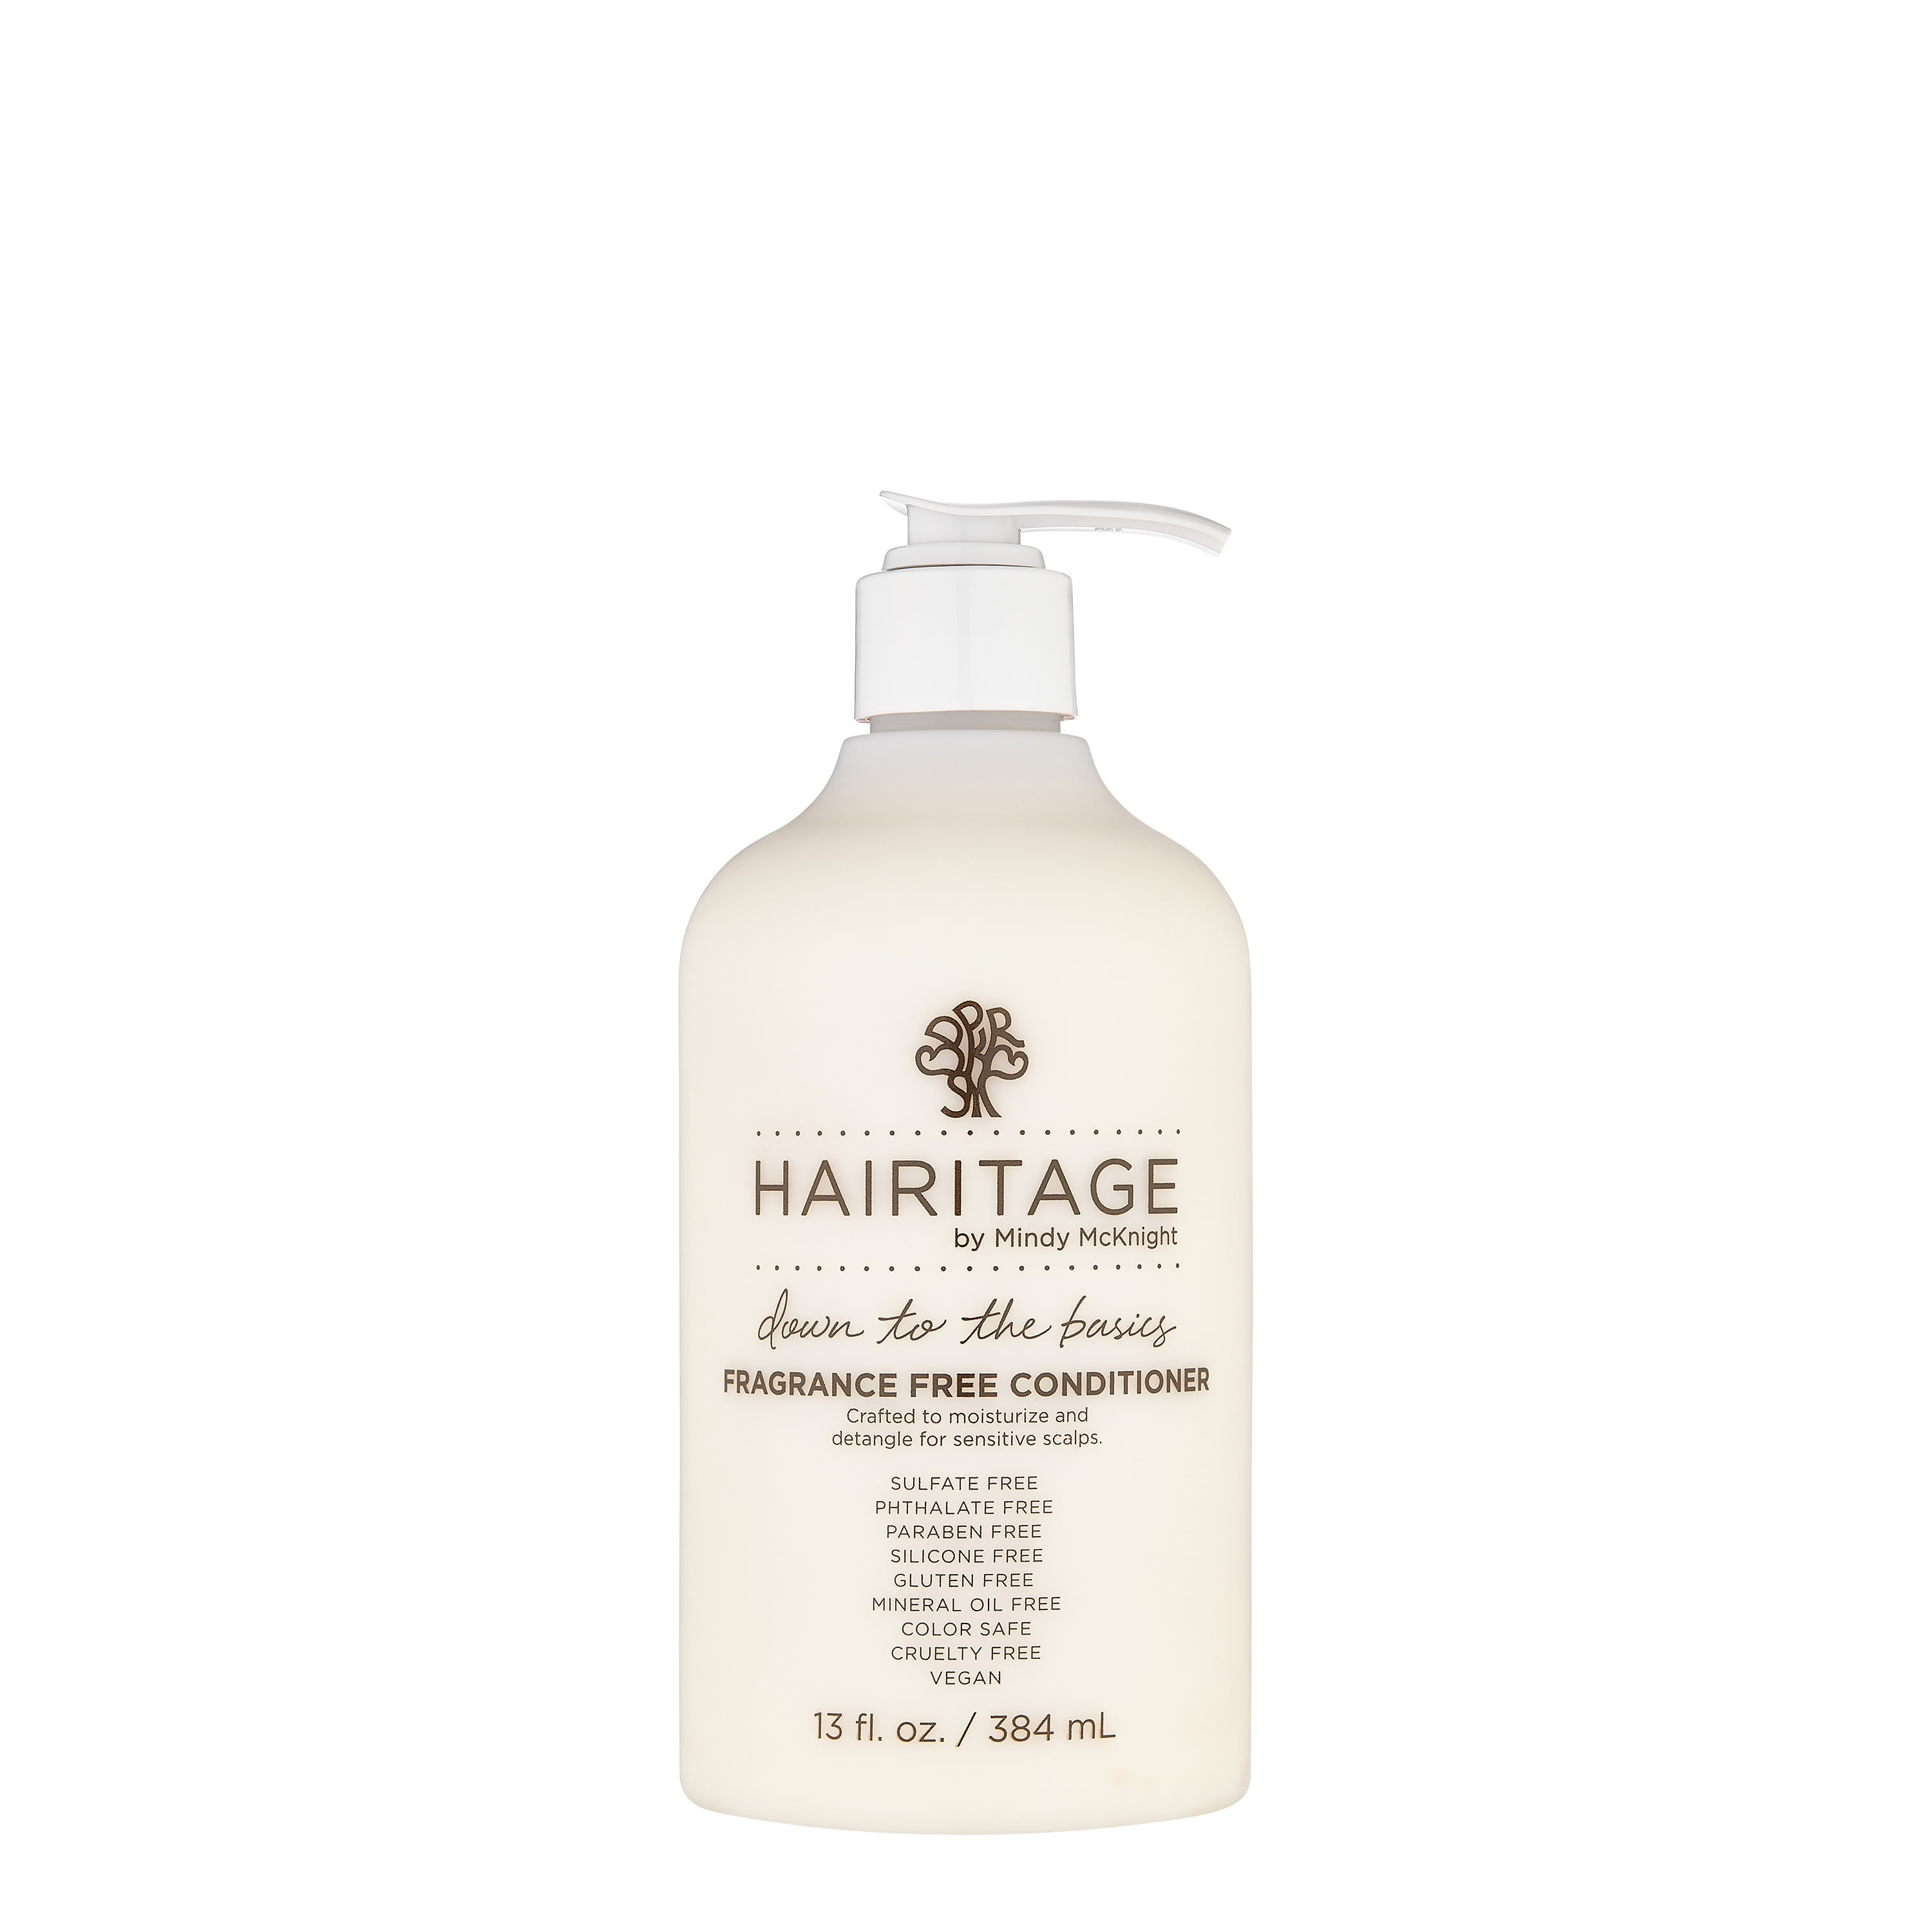 Hairitage Down to Basics Gentle Hair Conditioner with Vitamin E, Chamomile & Sunflower Seed Oil for Dry Hair | Fragrance Free | Hydrating Detangler | for All Hair Types | Vegan, Color Safe, 13 oz